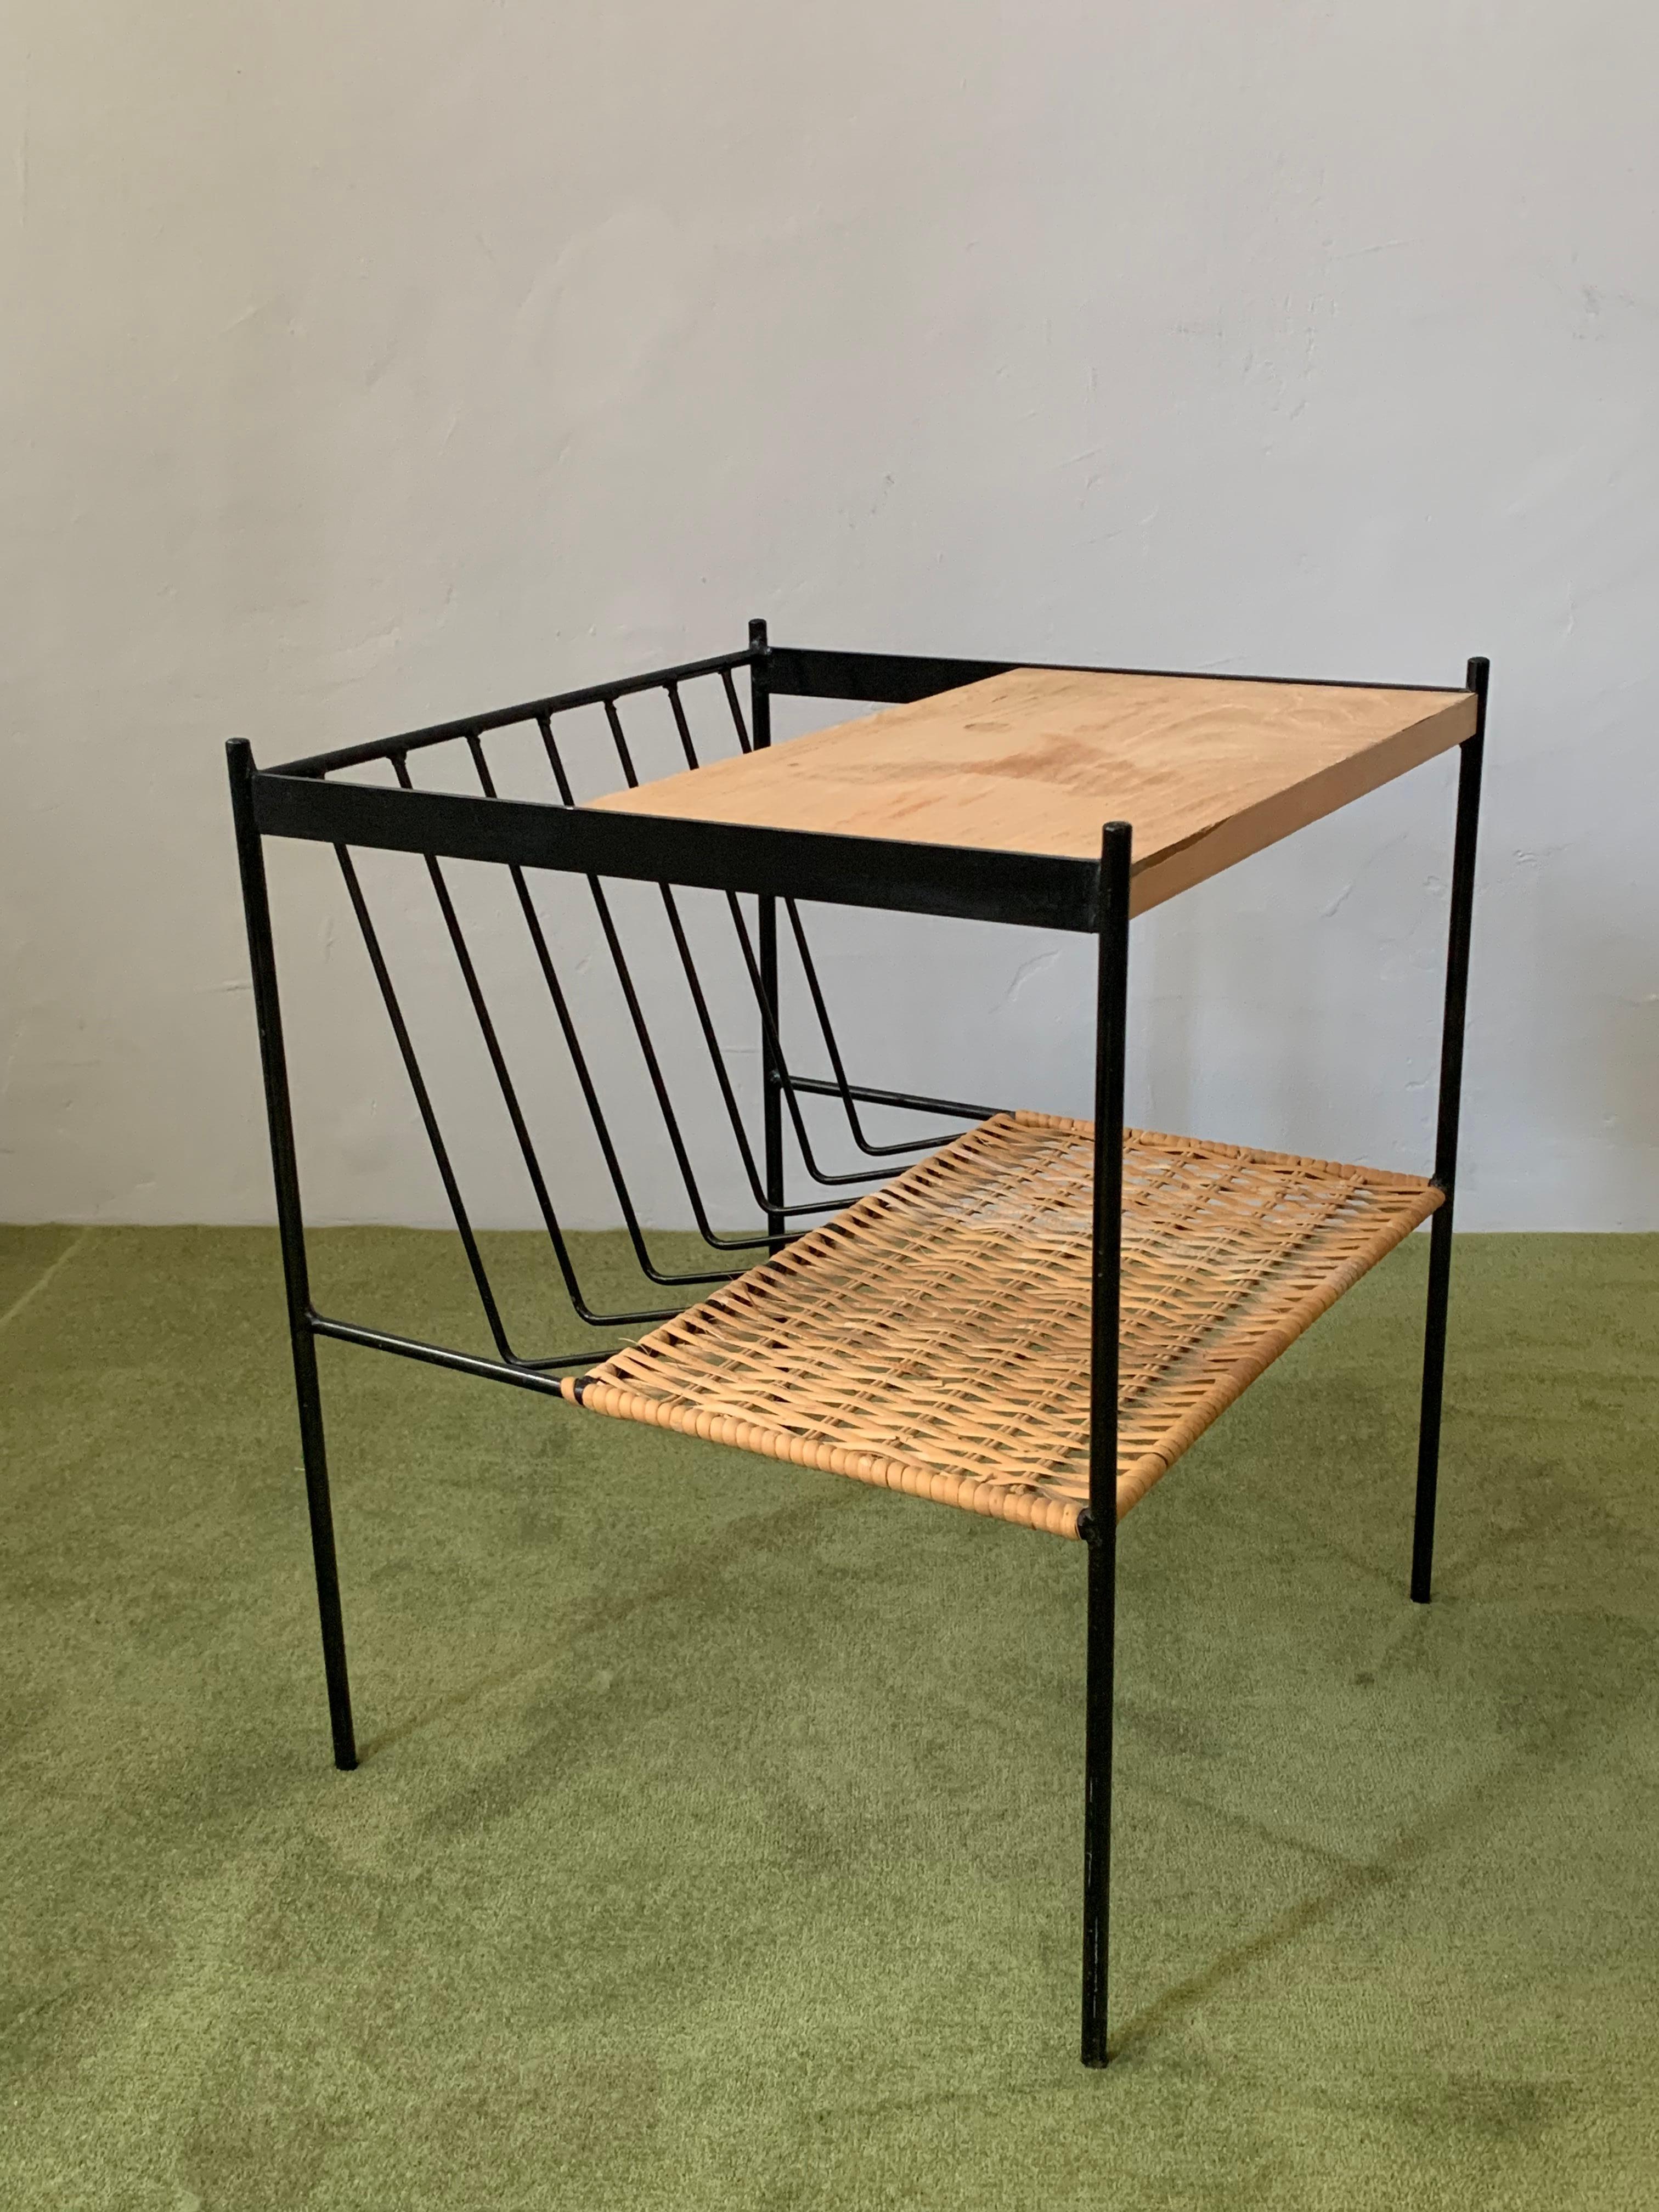 Beautifully formed magazine table with upper slab made of wood and a lower one made of wicker is now available. The magazin storage part is black colored iron such as the structure of the table itself. 
Restored in very good condition. Apart from